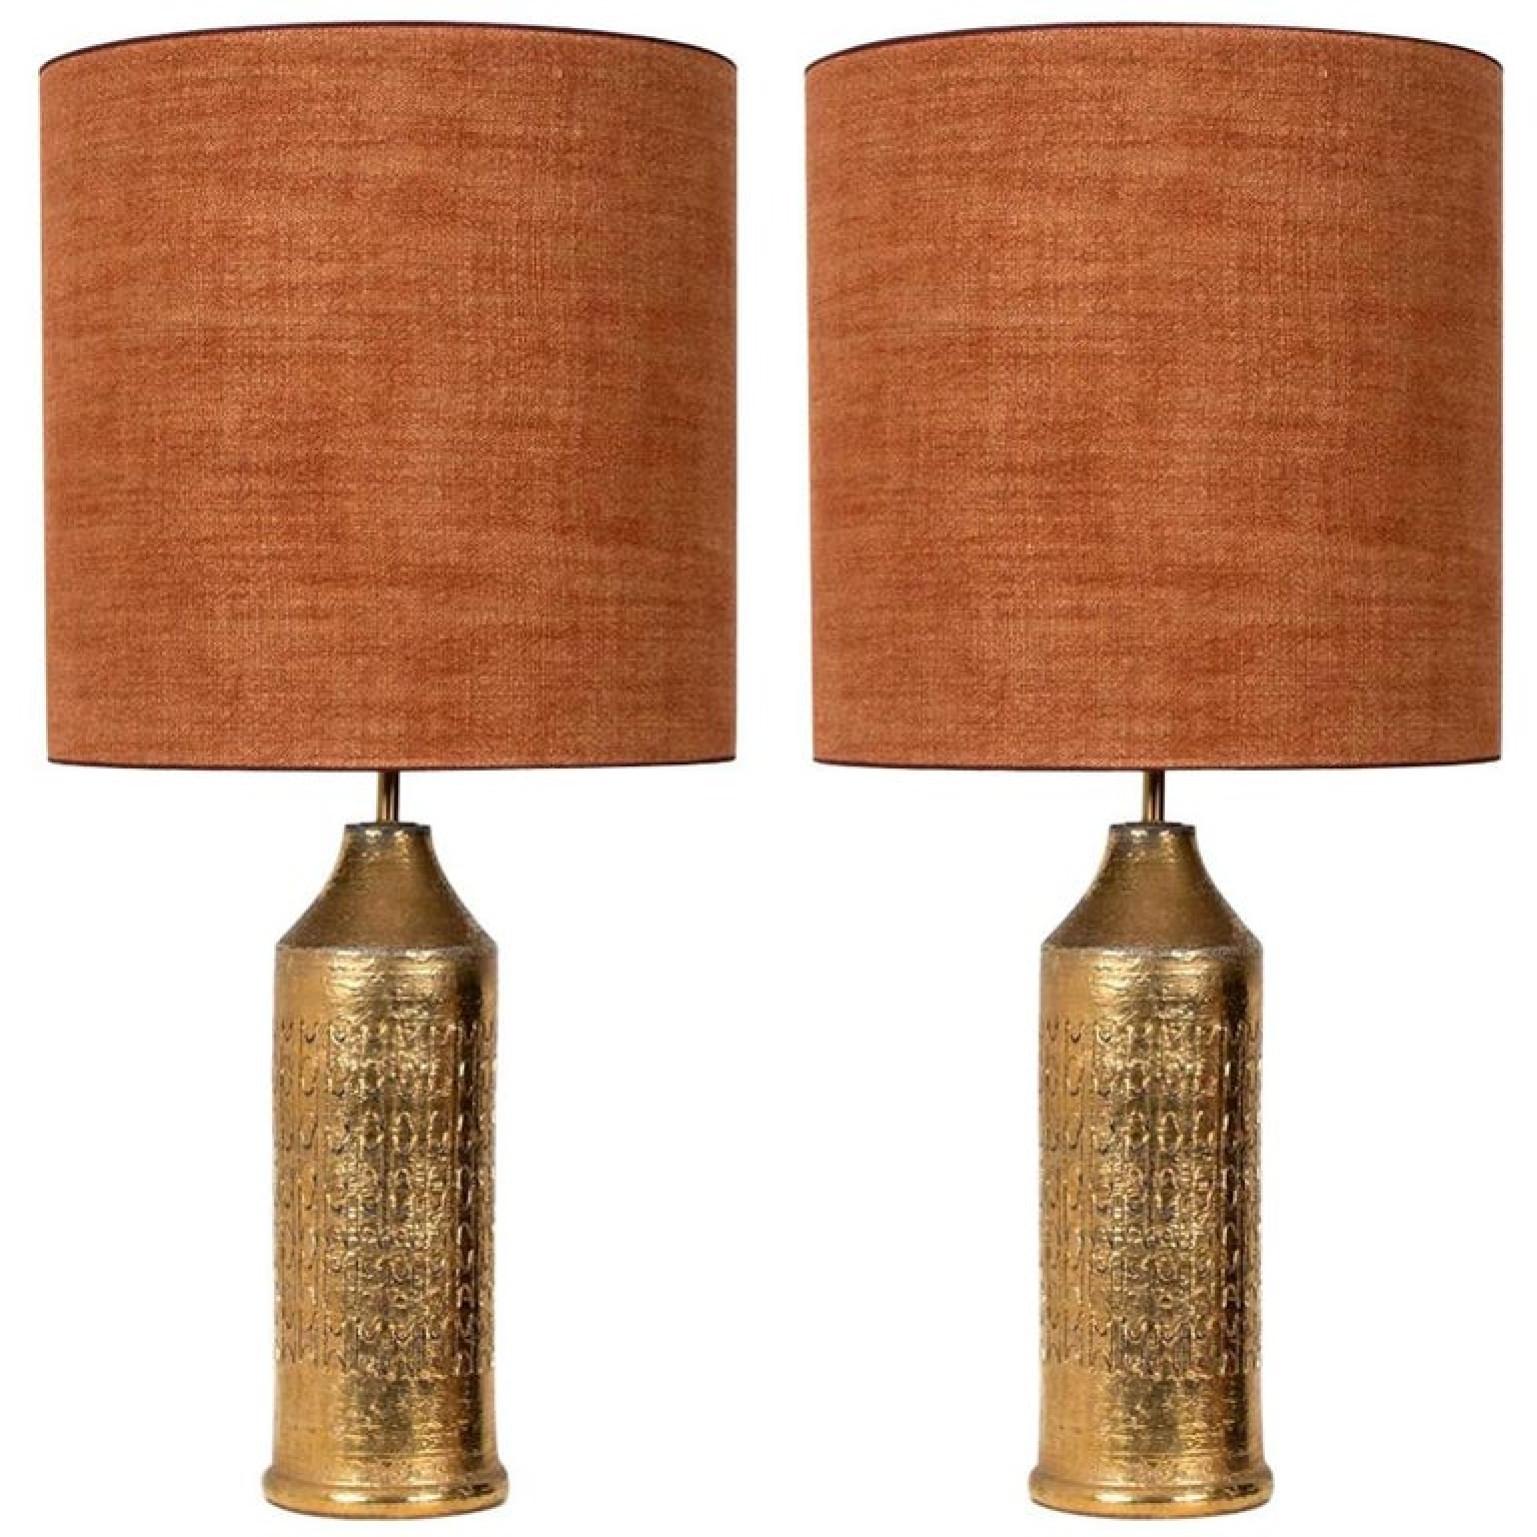 Pair of table lamps. Each lamp features a ceramic base with a rough surface in an off-white glaze with shiny metallic gold glazed patterns, Bitossi, Italy, circa 1960s. With exceptional new custom made sil brique shades by René Houben. With warm